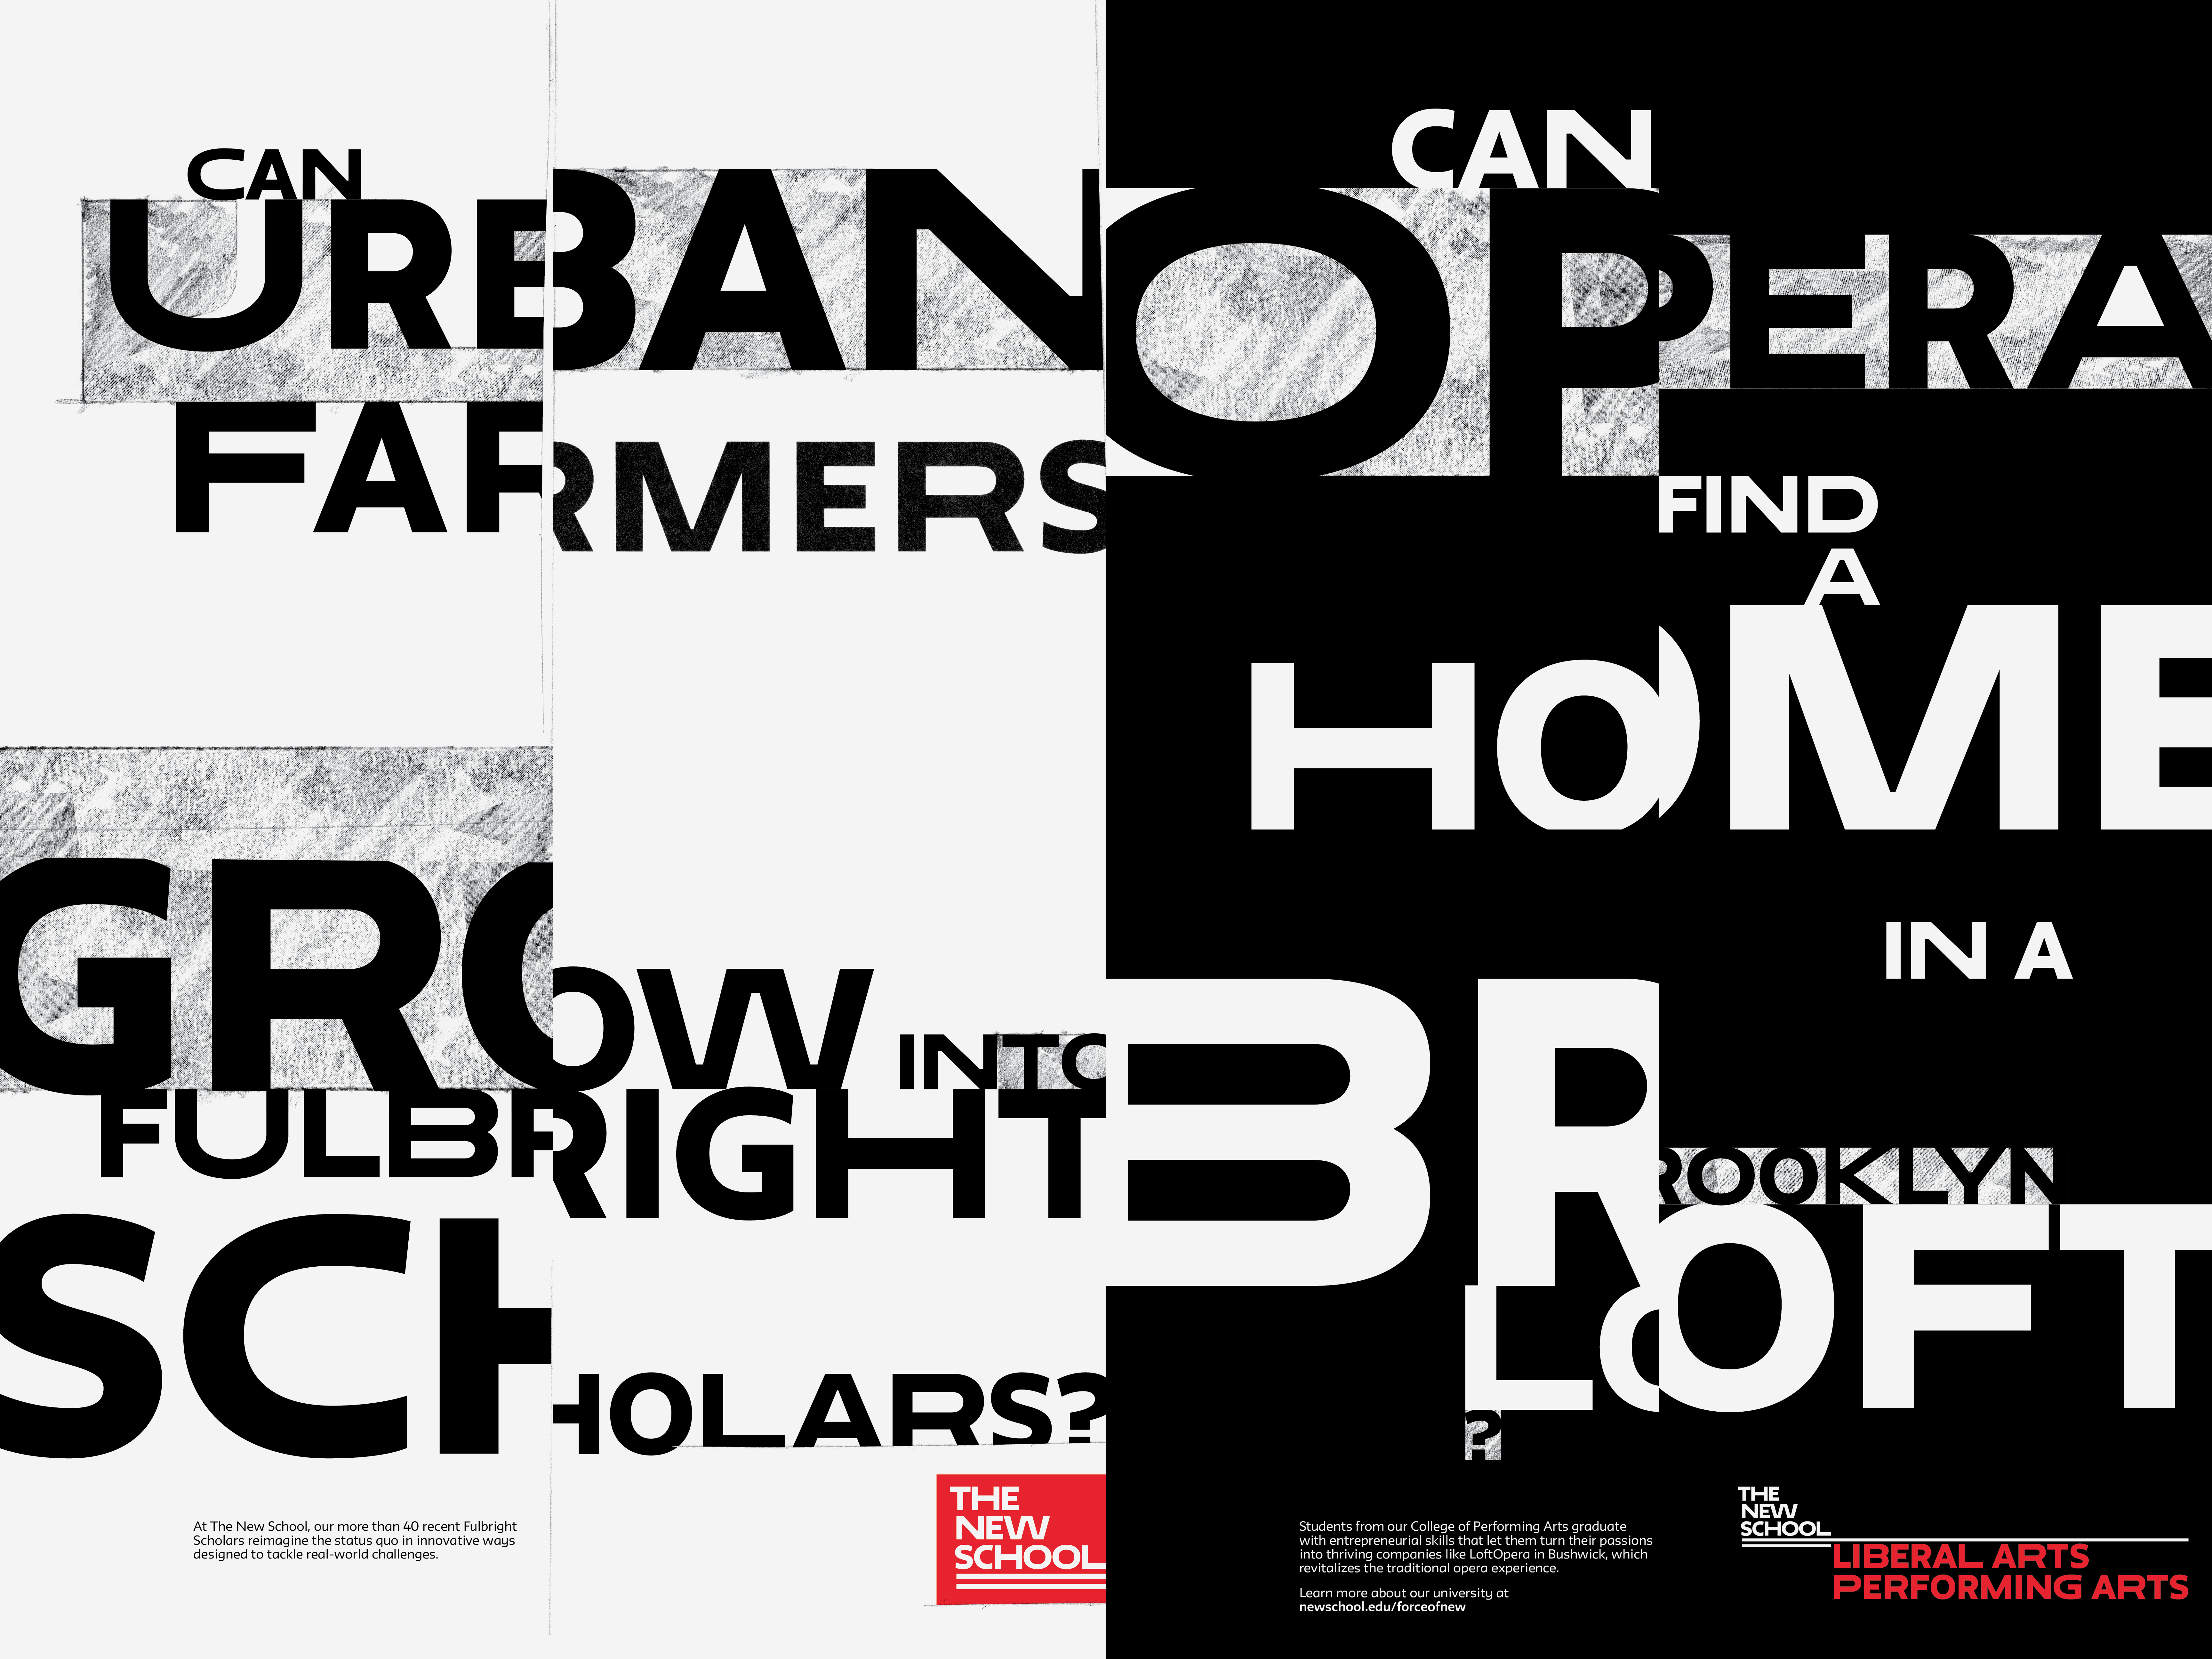 Two posters that say "Can urban farmers grow into Fulbright scholars?" and "Can opera find a home in a Brooklyn loft?"